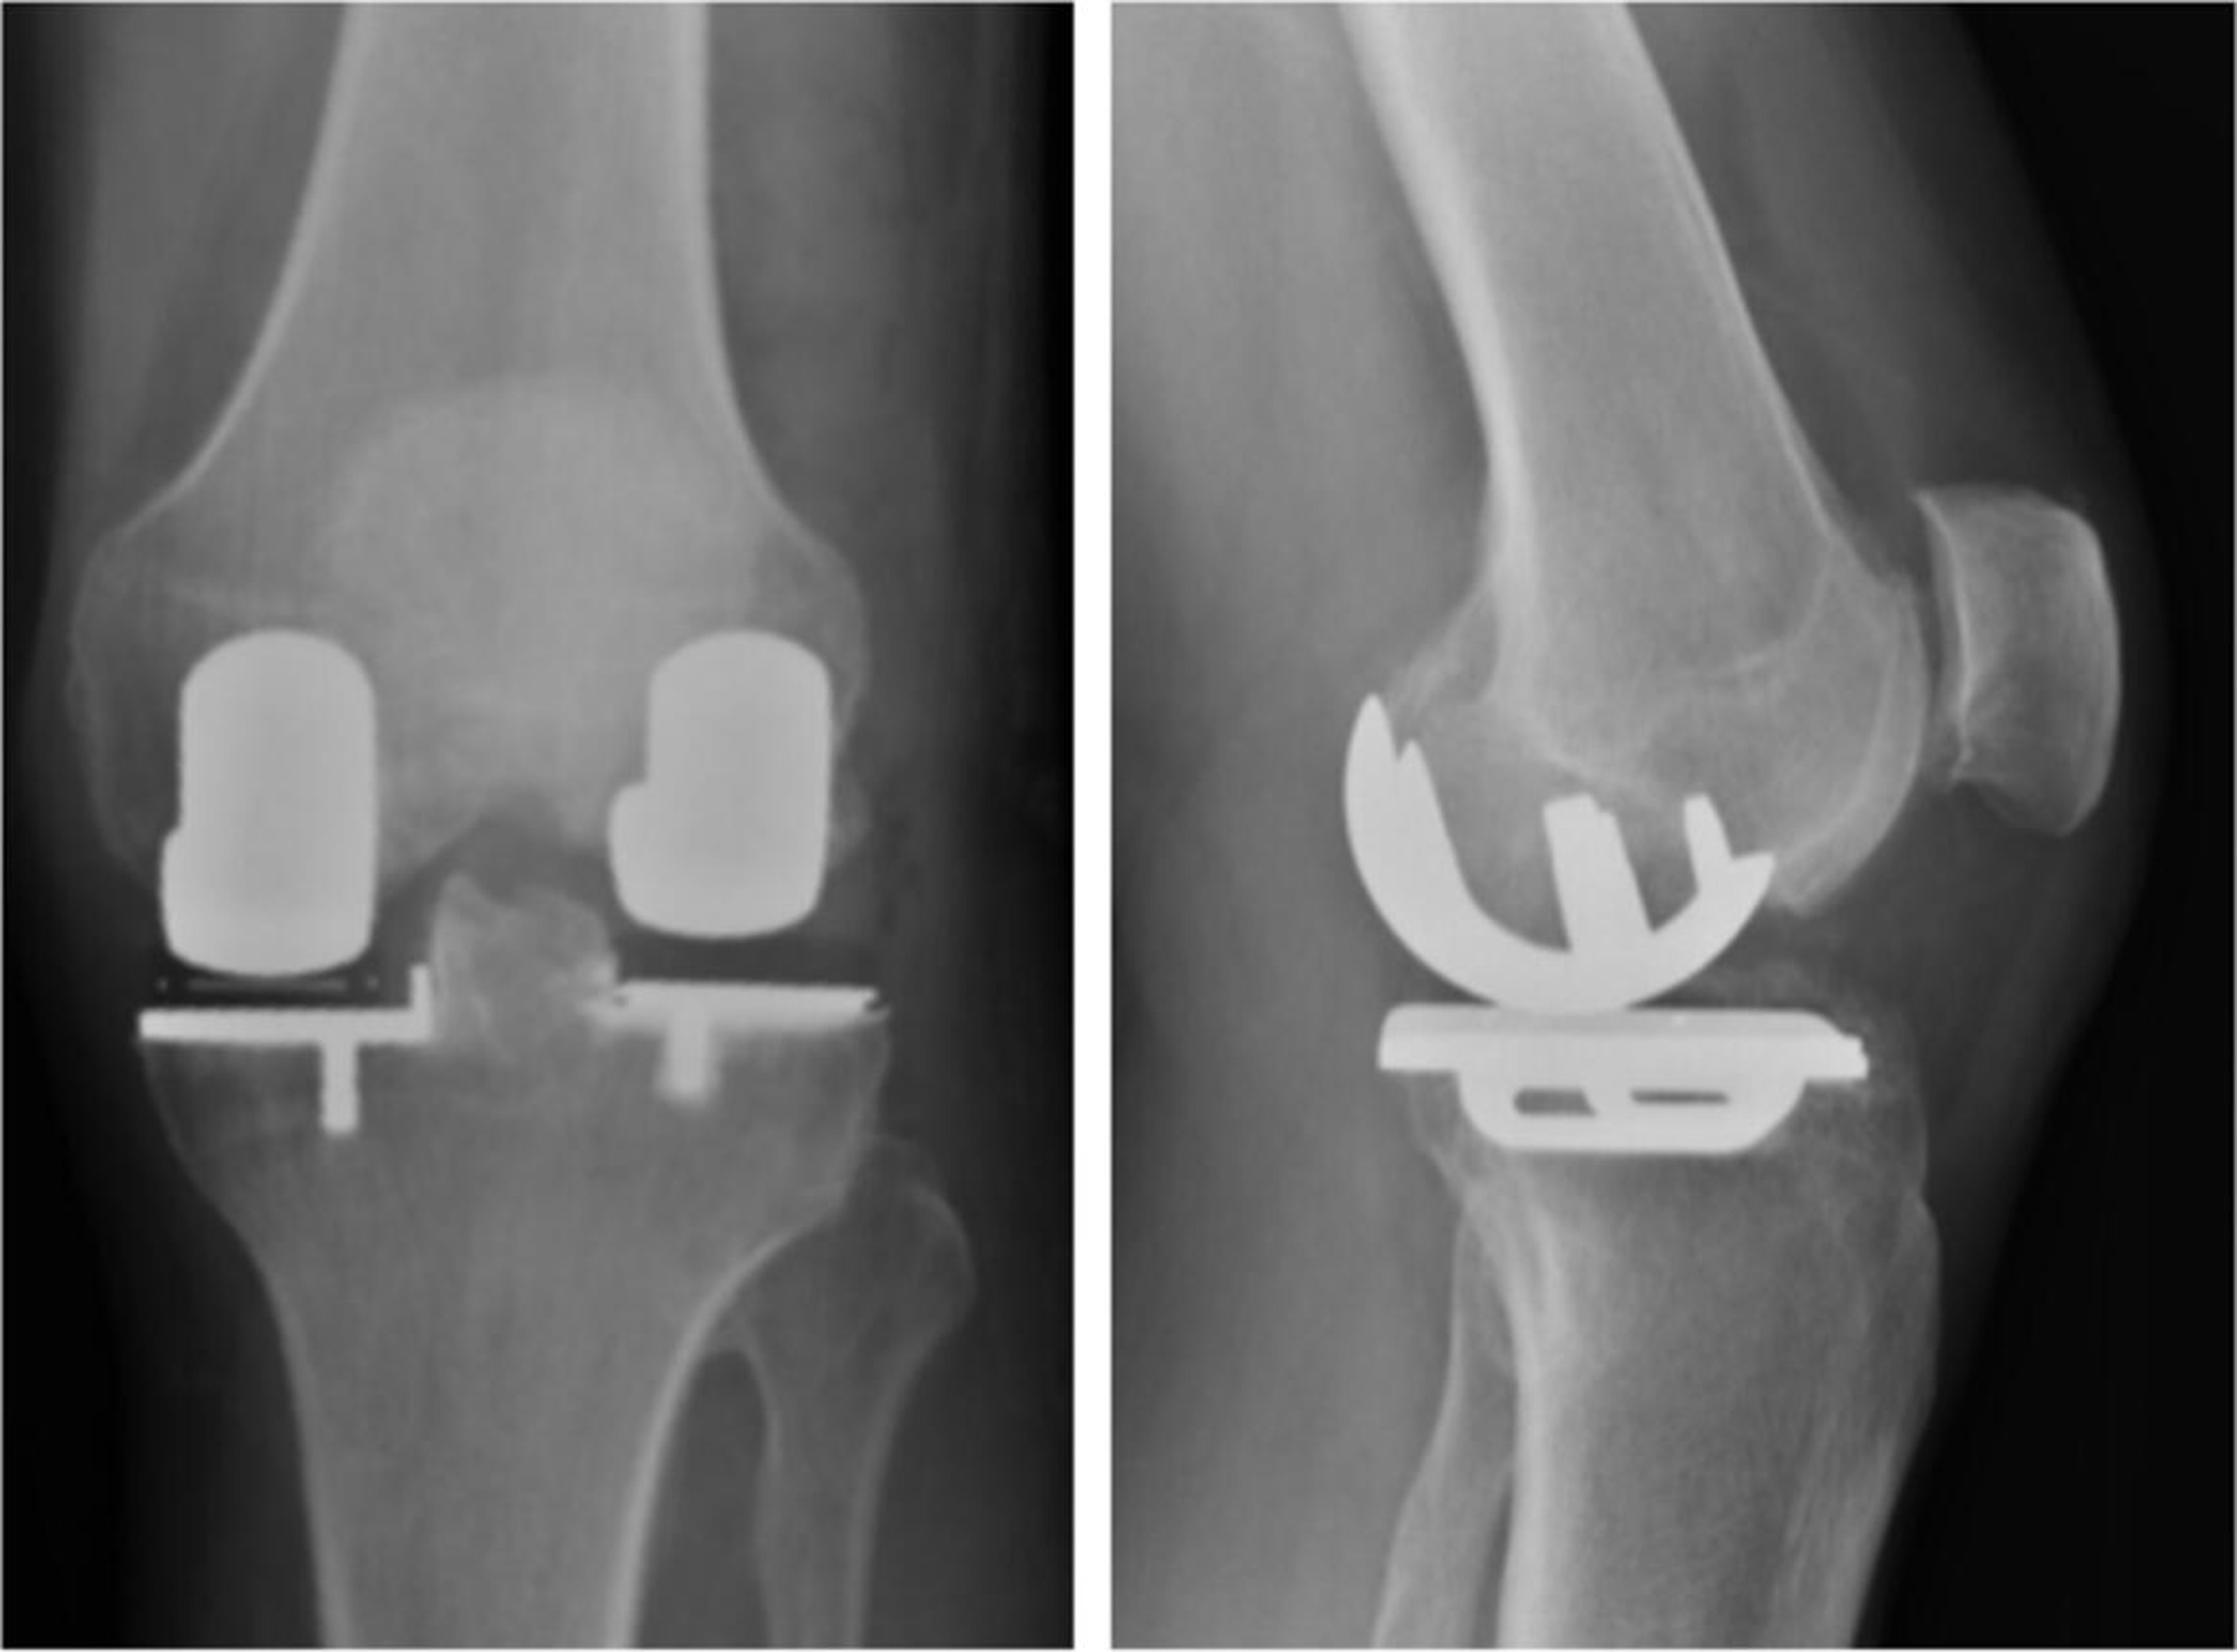 Fig. 1 
          Anterior-posterior and lateral radiographs of the left knee with bi-unicondylar arthroplasty in situ.
        